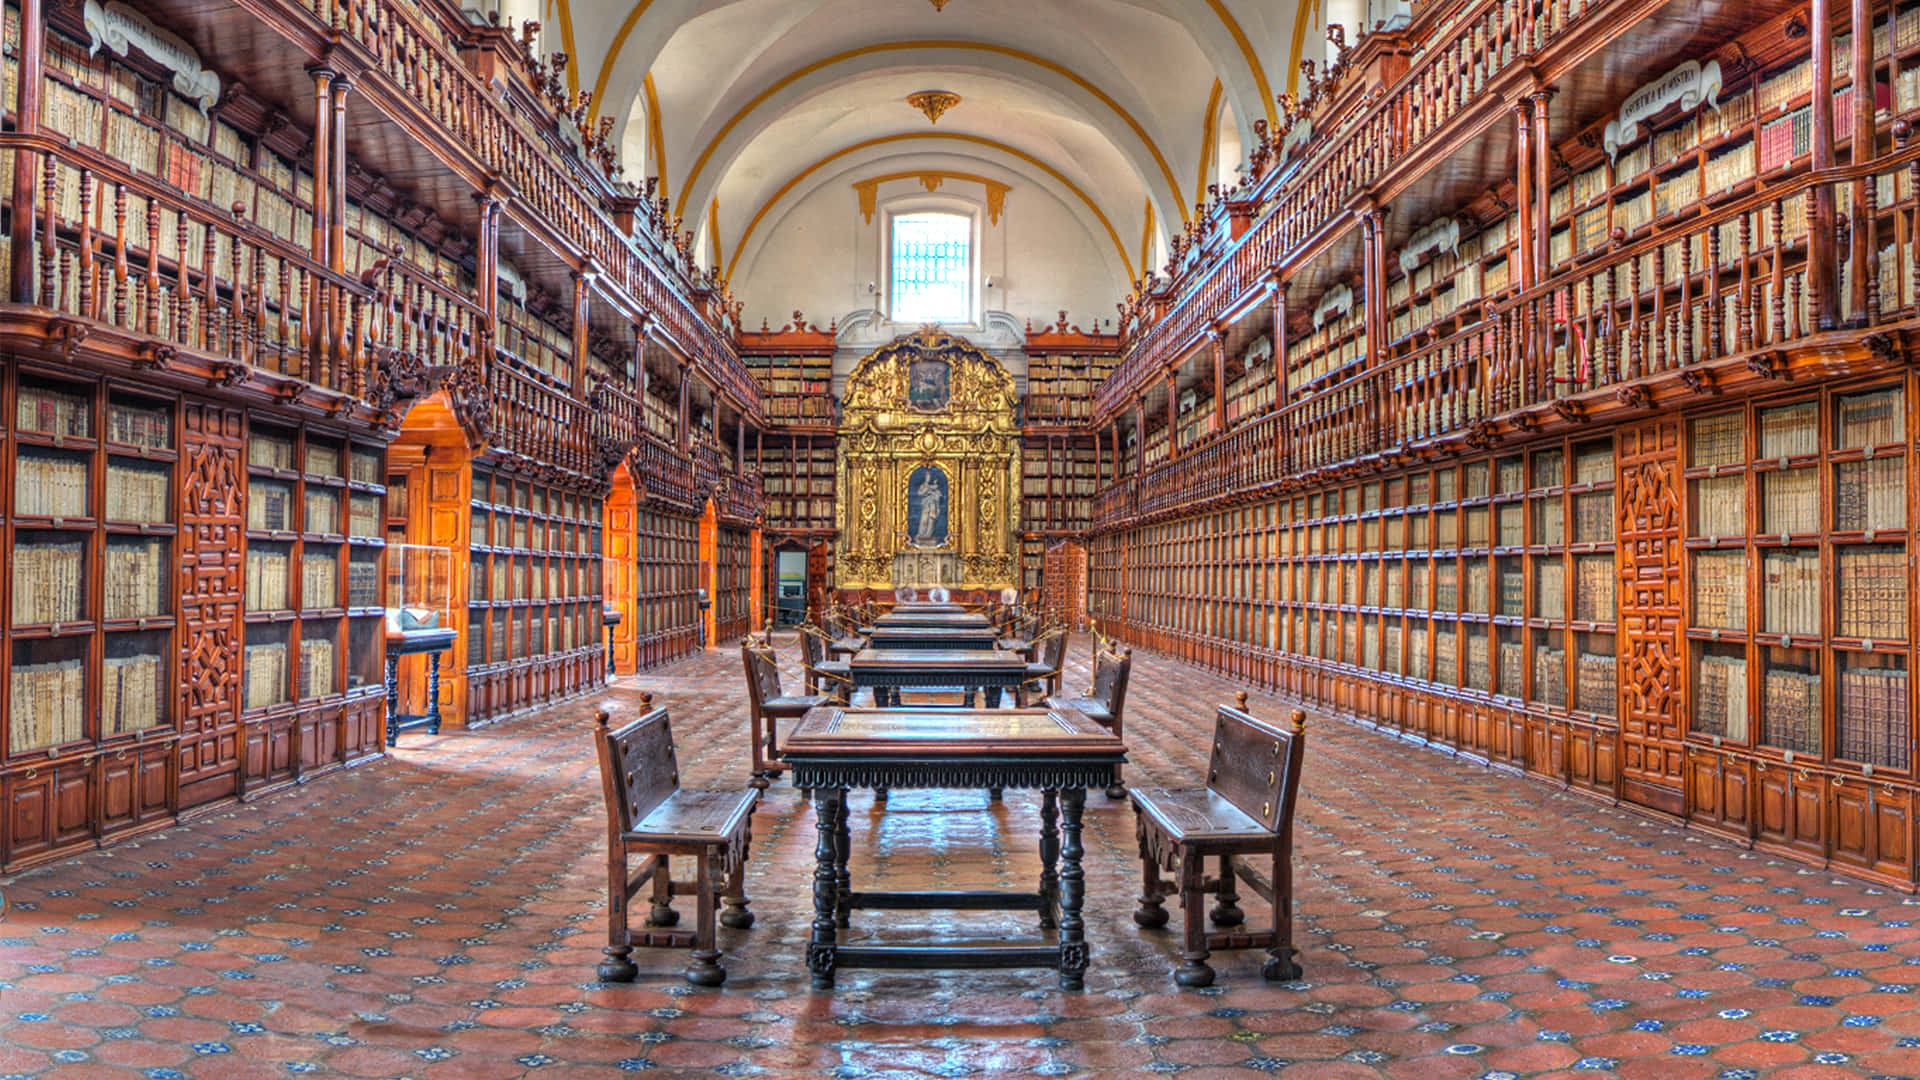 A Large Library With Many Books